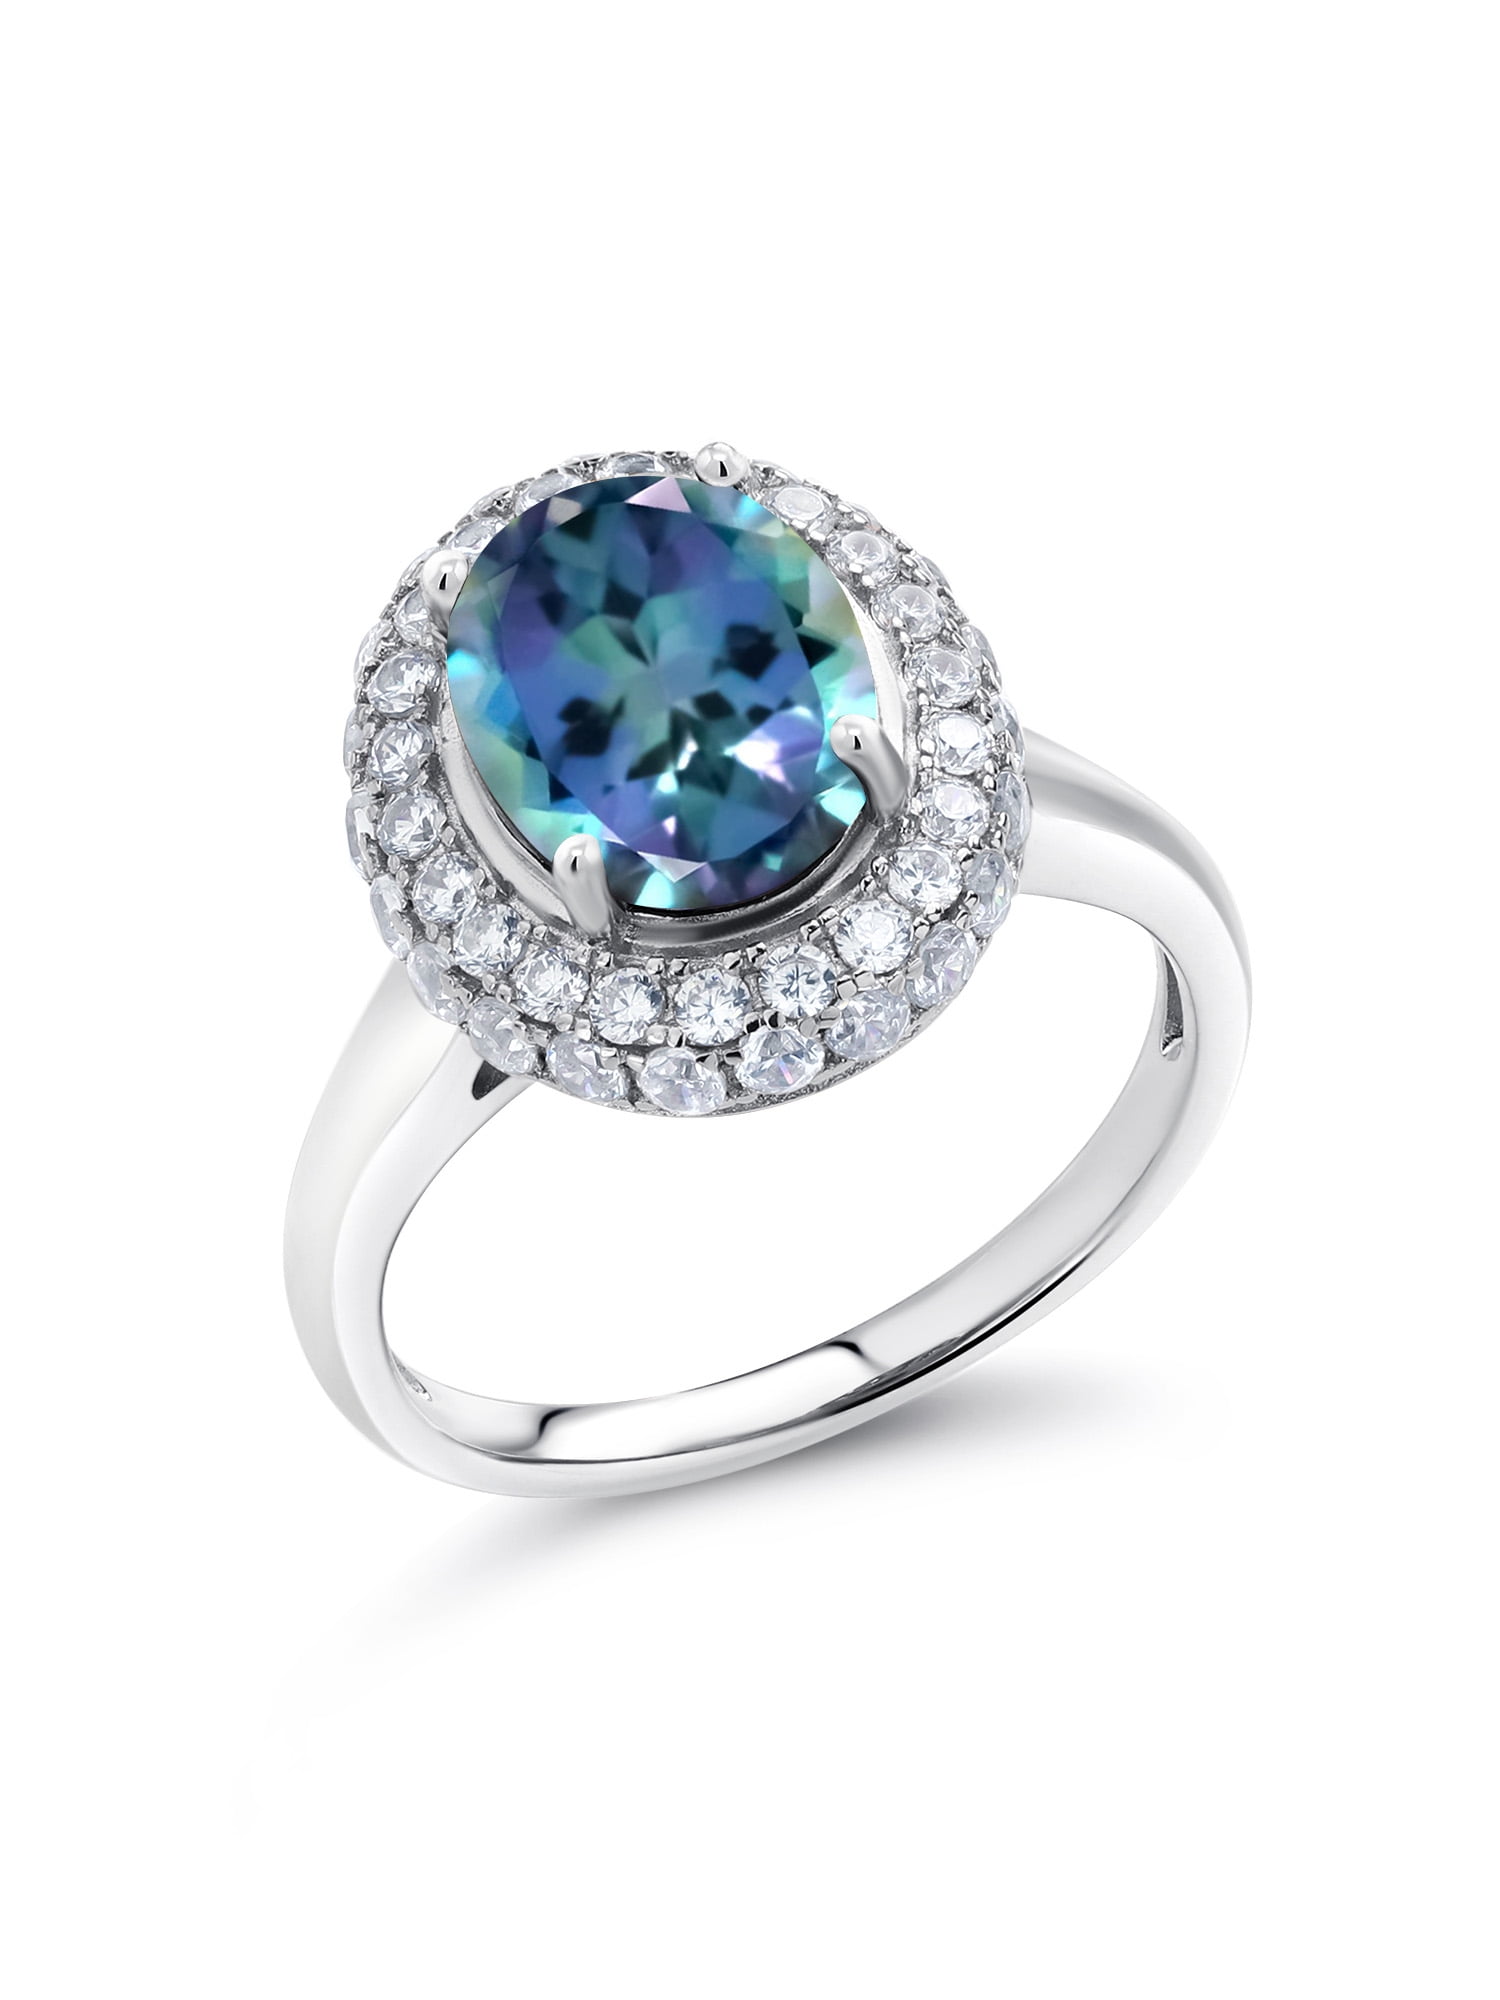 Solid 925 Sterling Silver Jewelry 2.52 Ct Stunning Oval Millennium Blue Mystic Topaz Ring Available in size 5, 6, 7, 8, 9